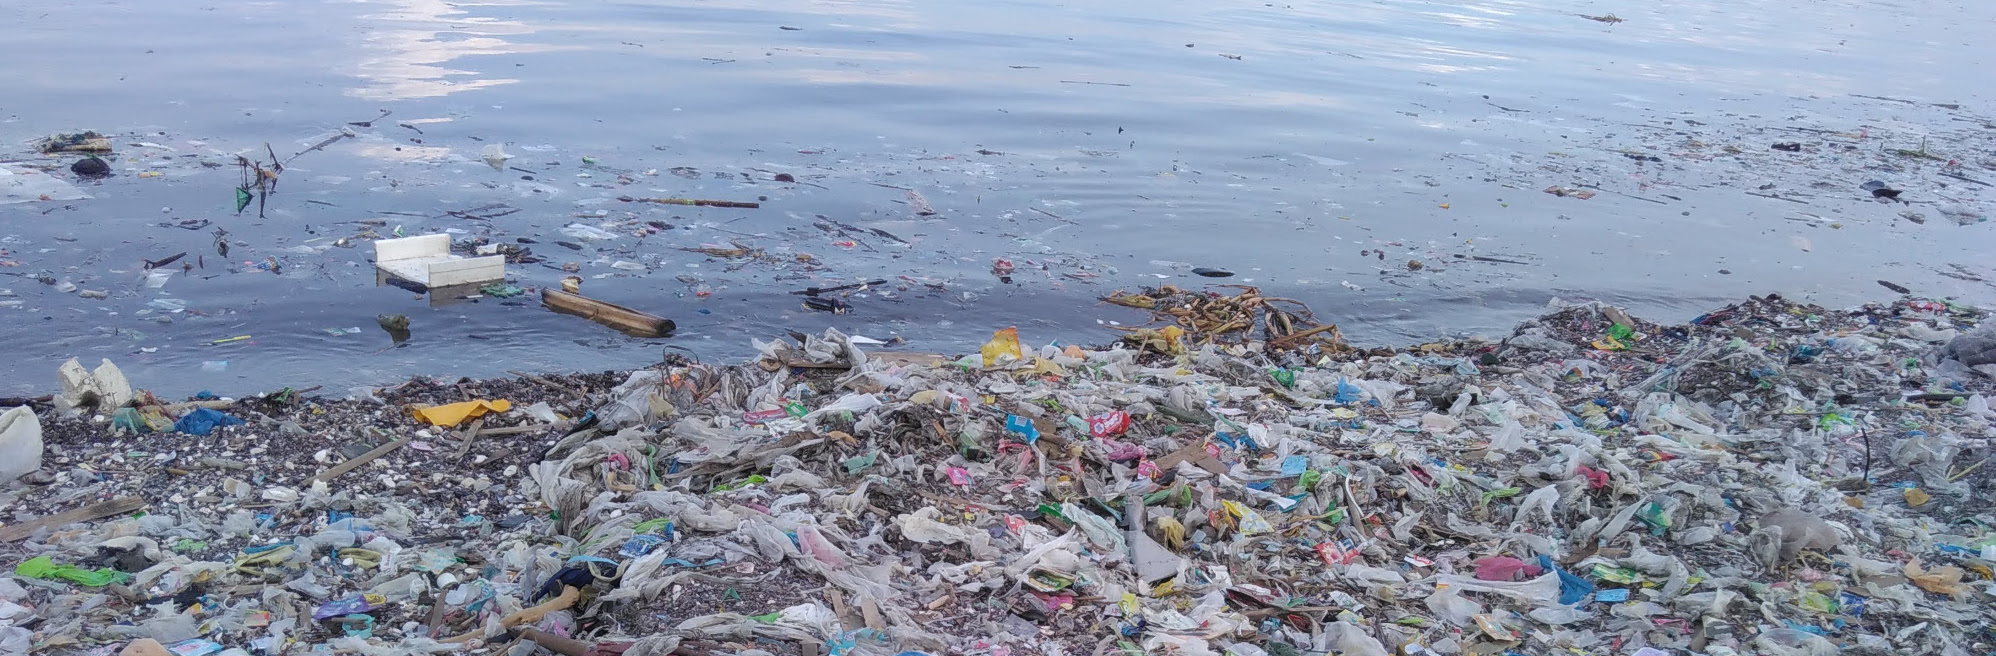 A vision for a future free from plastic pollution: The EU must